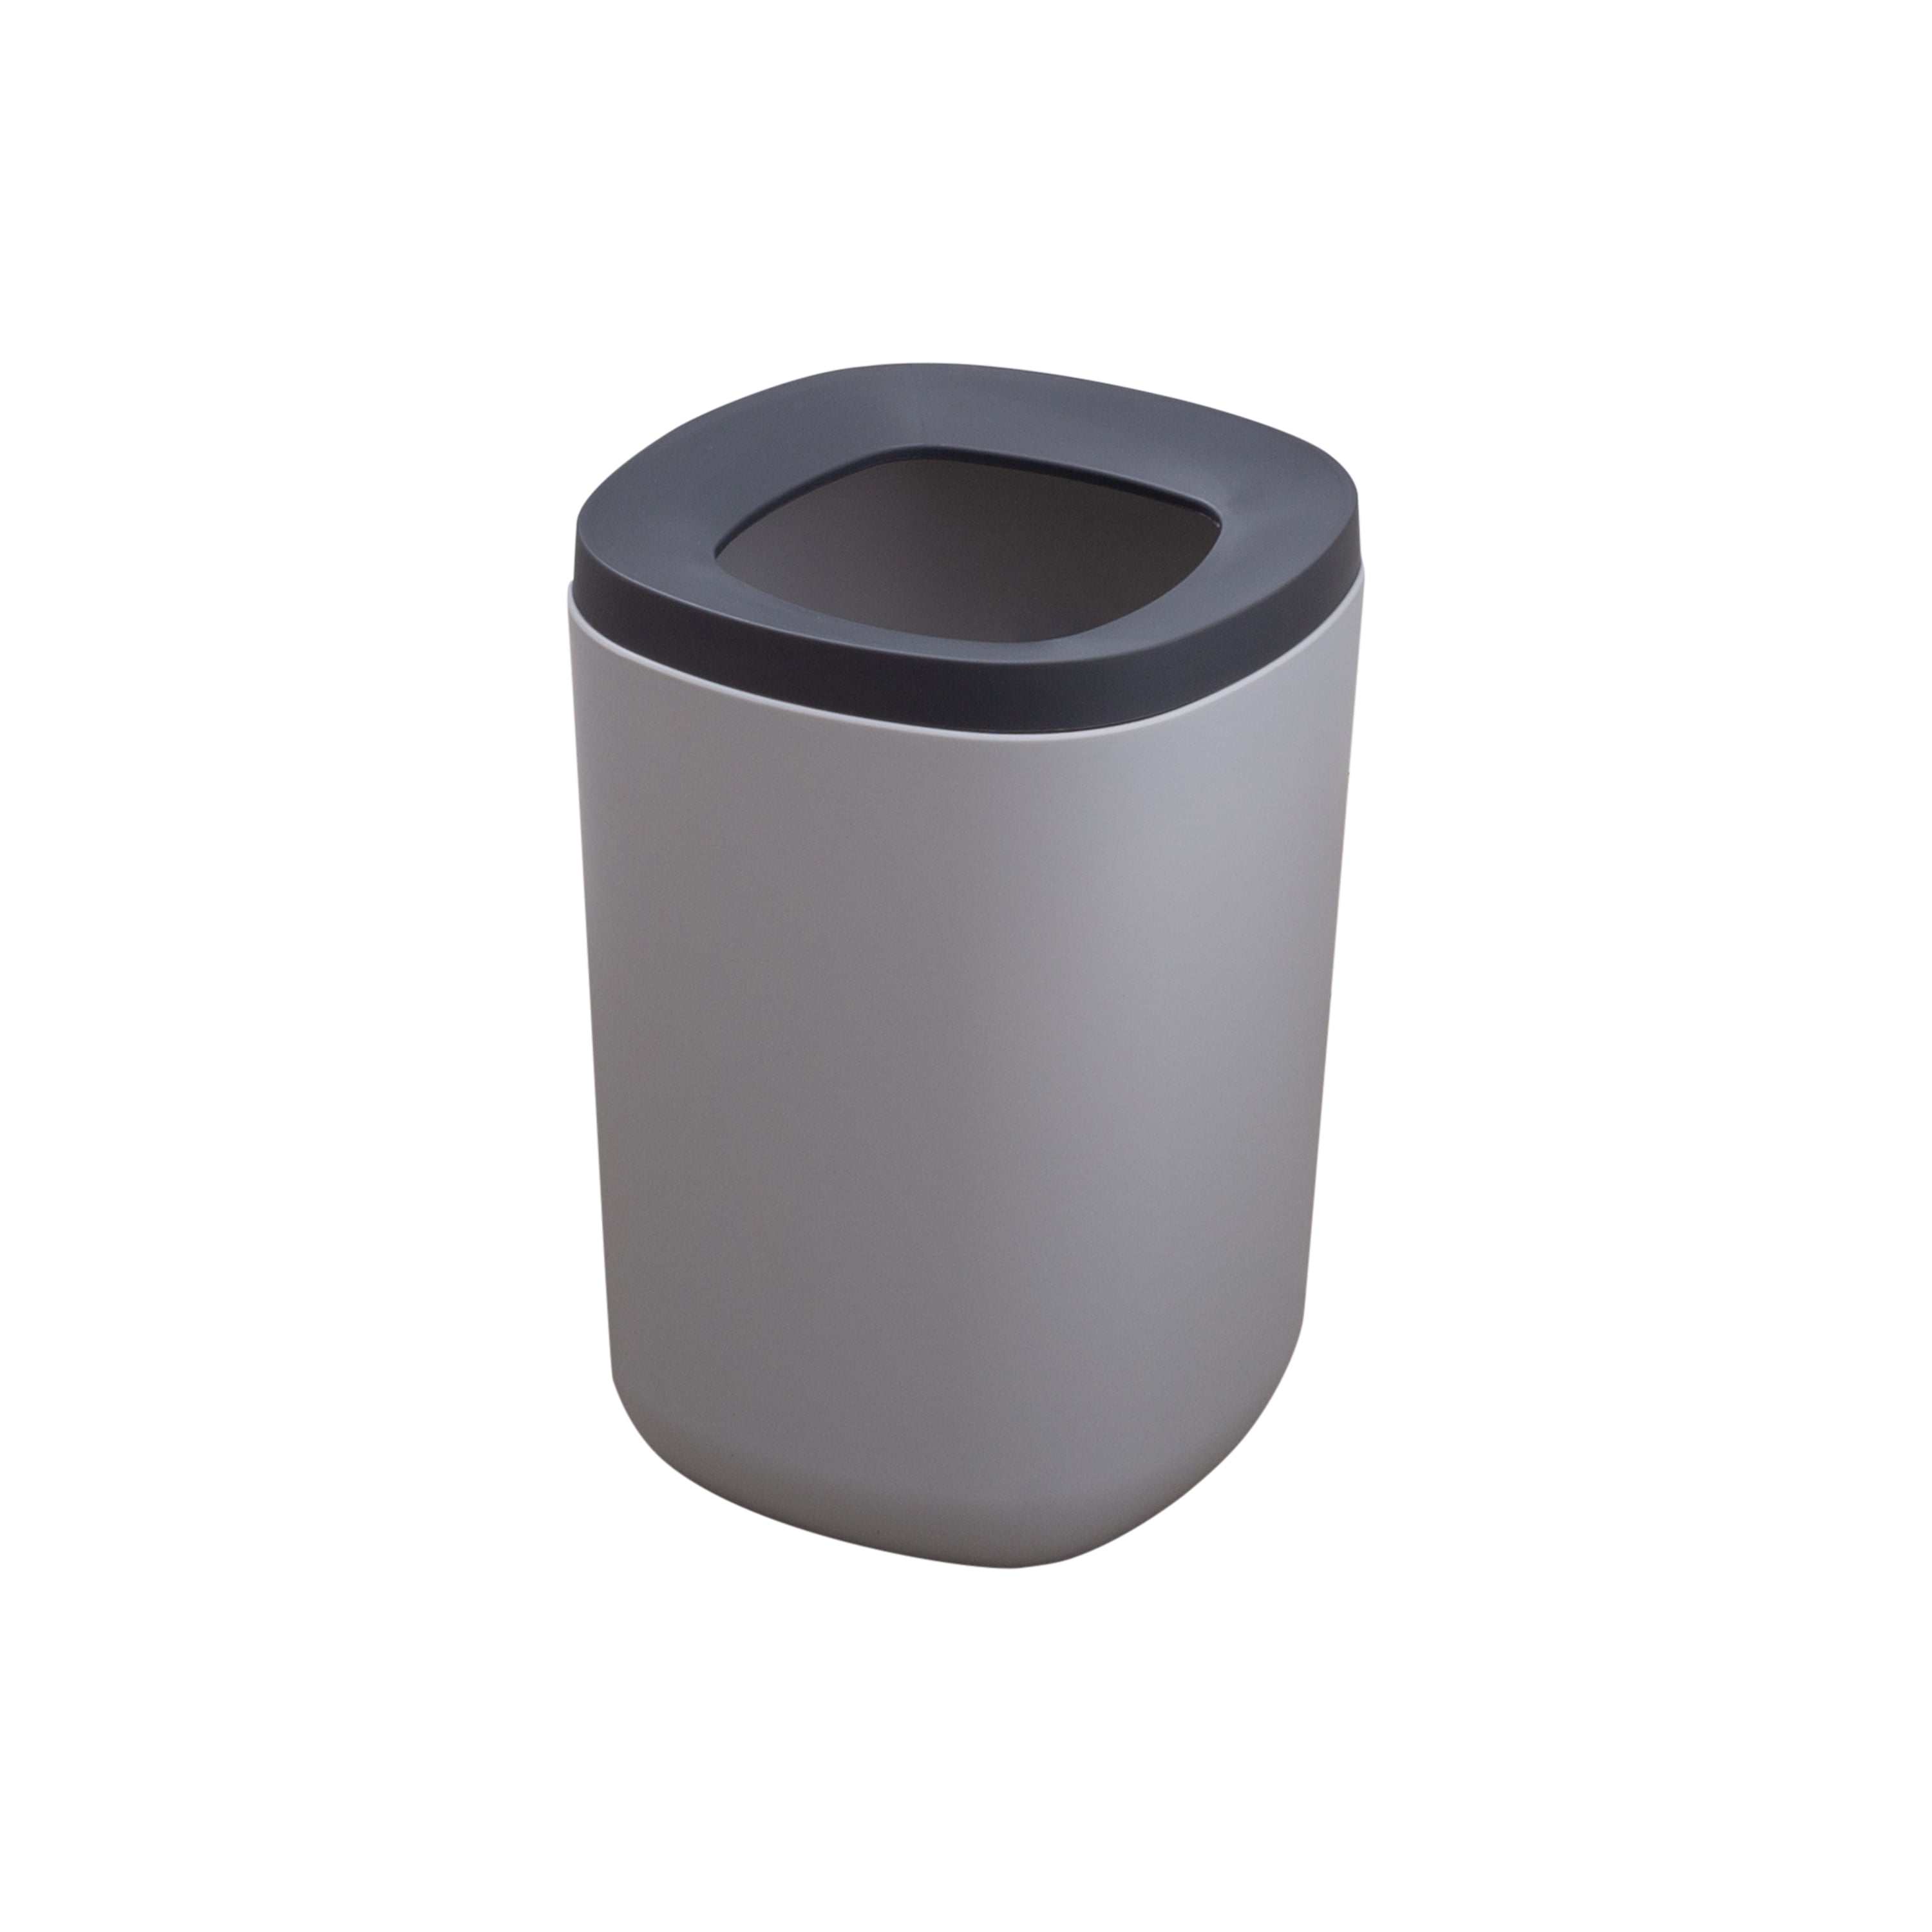 Umbra Corsa Bathroom Trash Can with Lid Small Waste Basket Charcoal 1005487-149